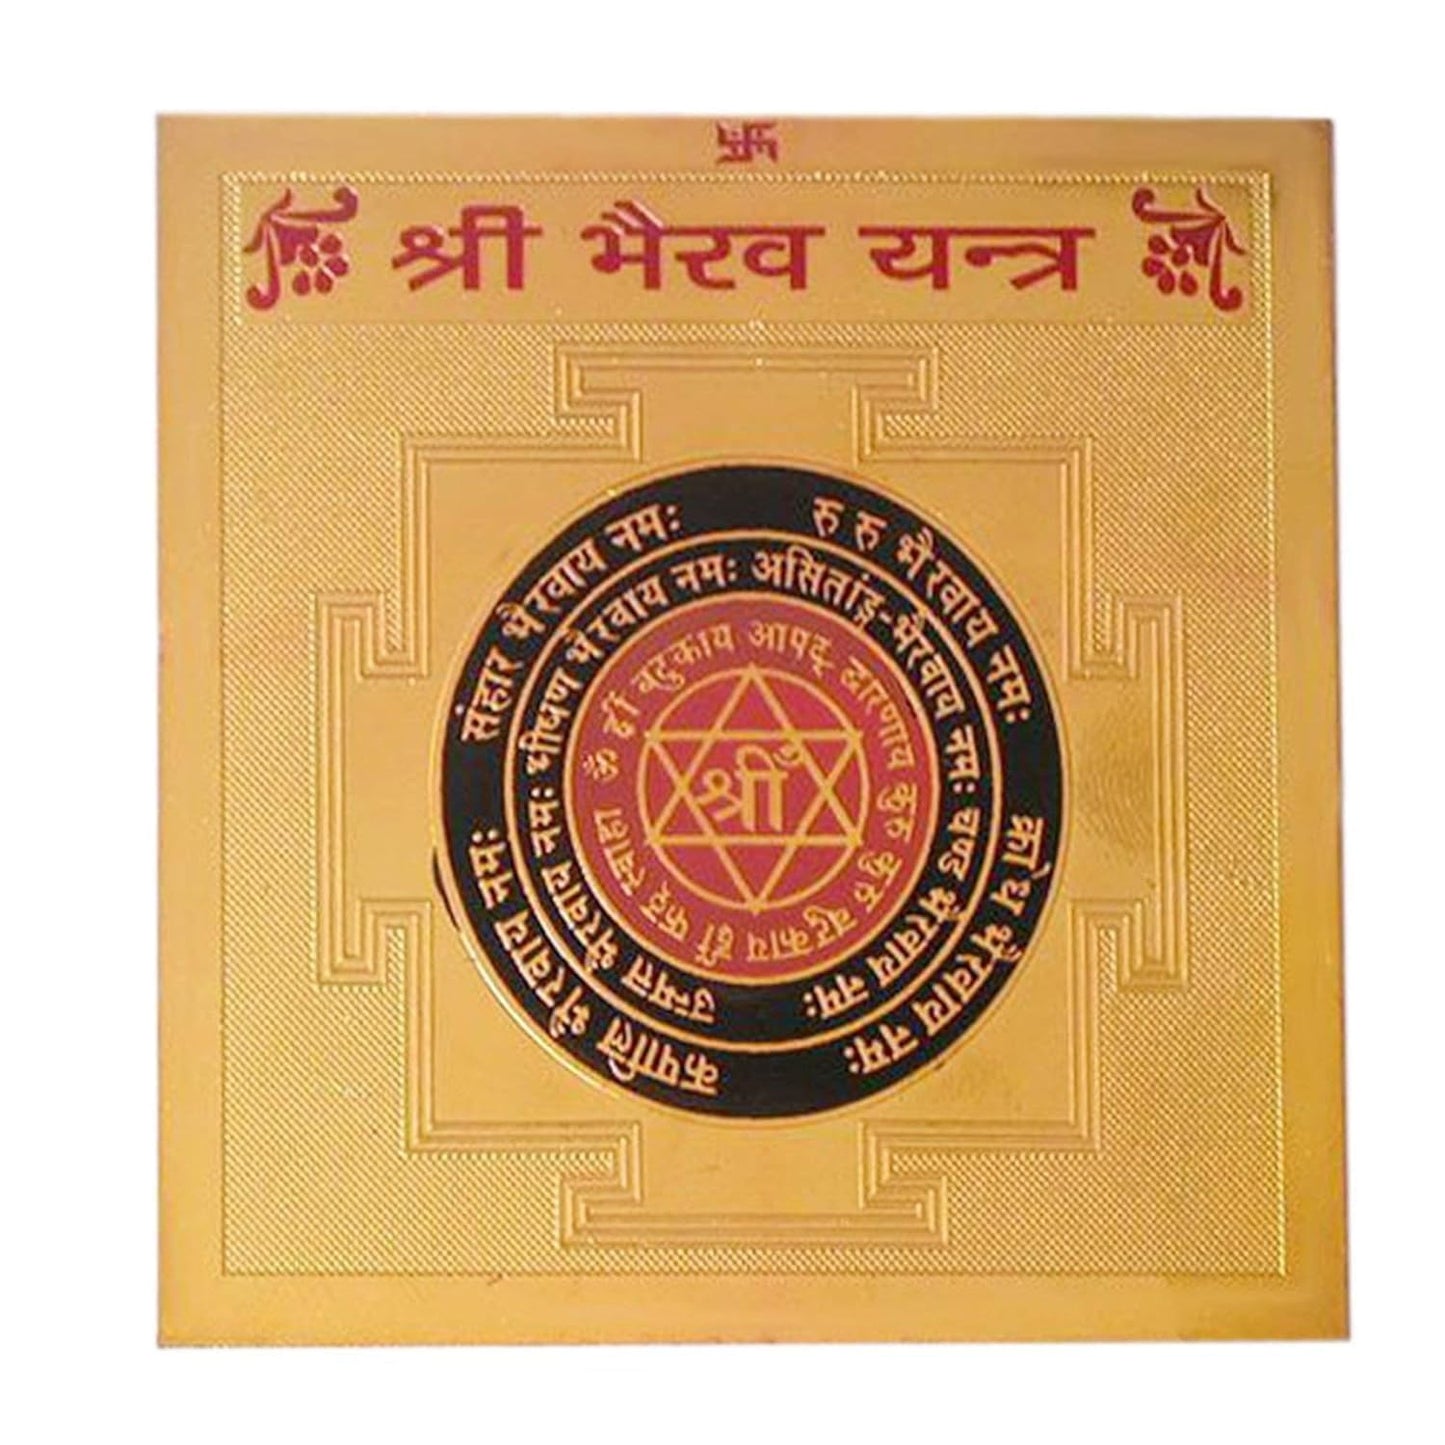 Pujahome Original Shri Bhairav Yantra - 3.25x3.25 Inch, Gold Polished, Spiritual and Vedic Yantra for Protection and Prosperity